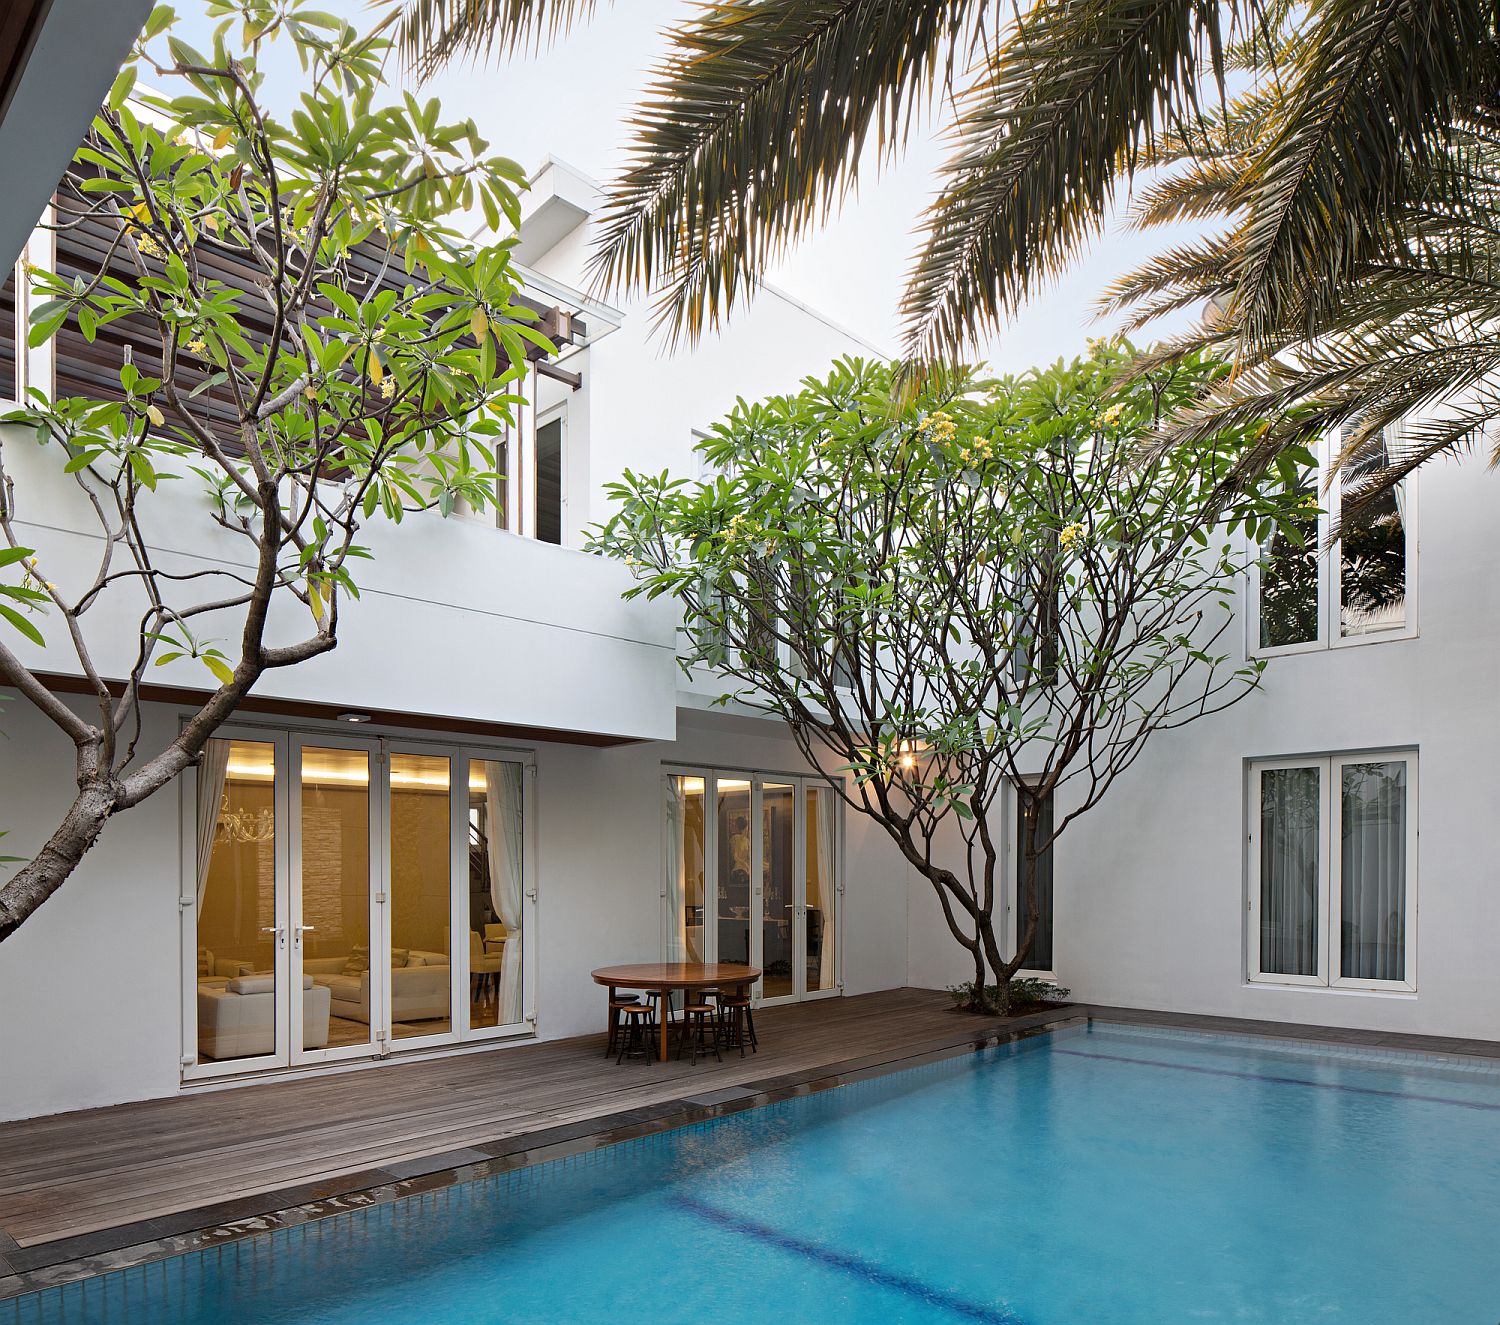 Shared-pool-area-and-central-courtyard-of-the-twin-houses